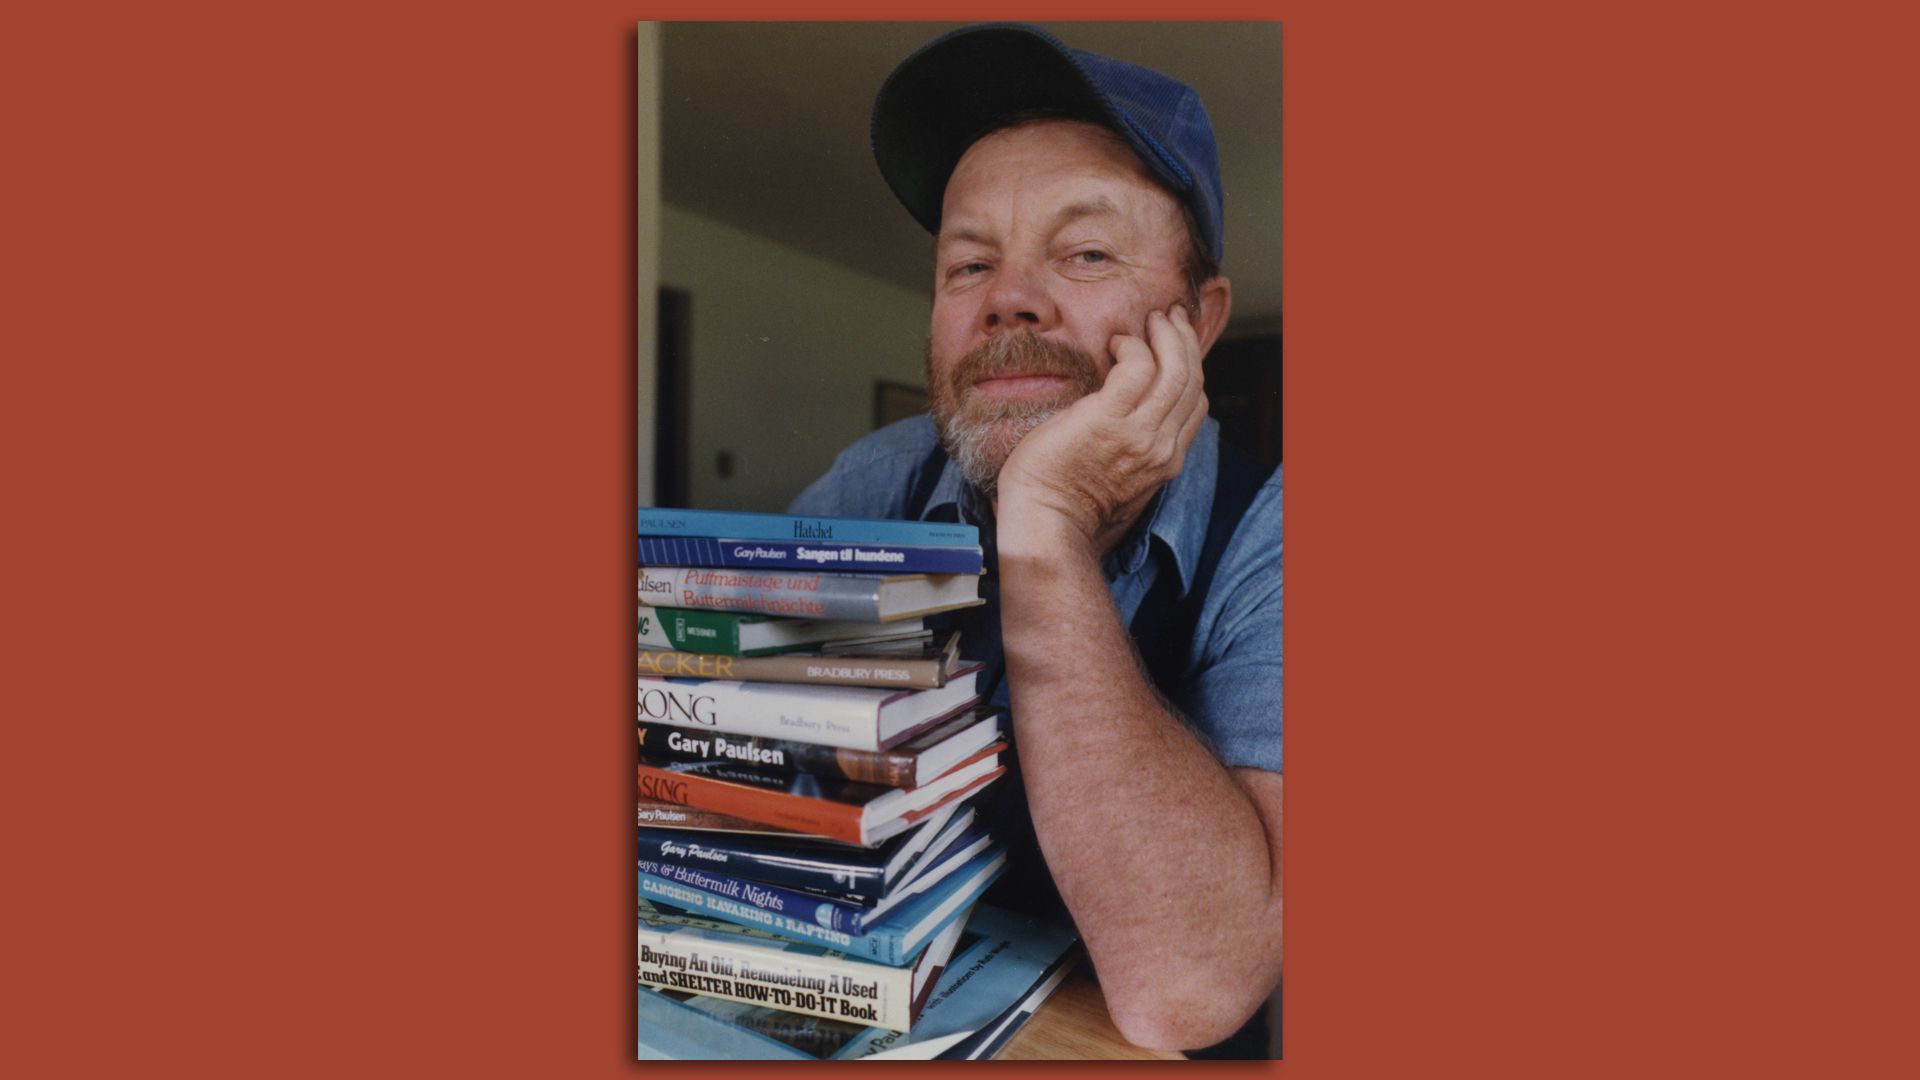 Gary Paulsen sits with his arm on his chin behind a stack of his books 